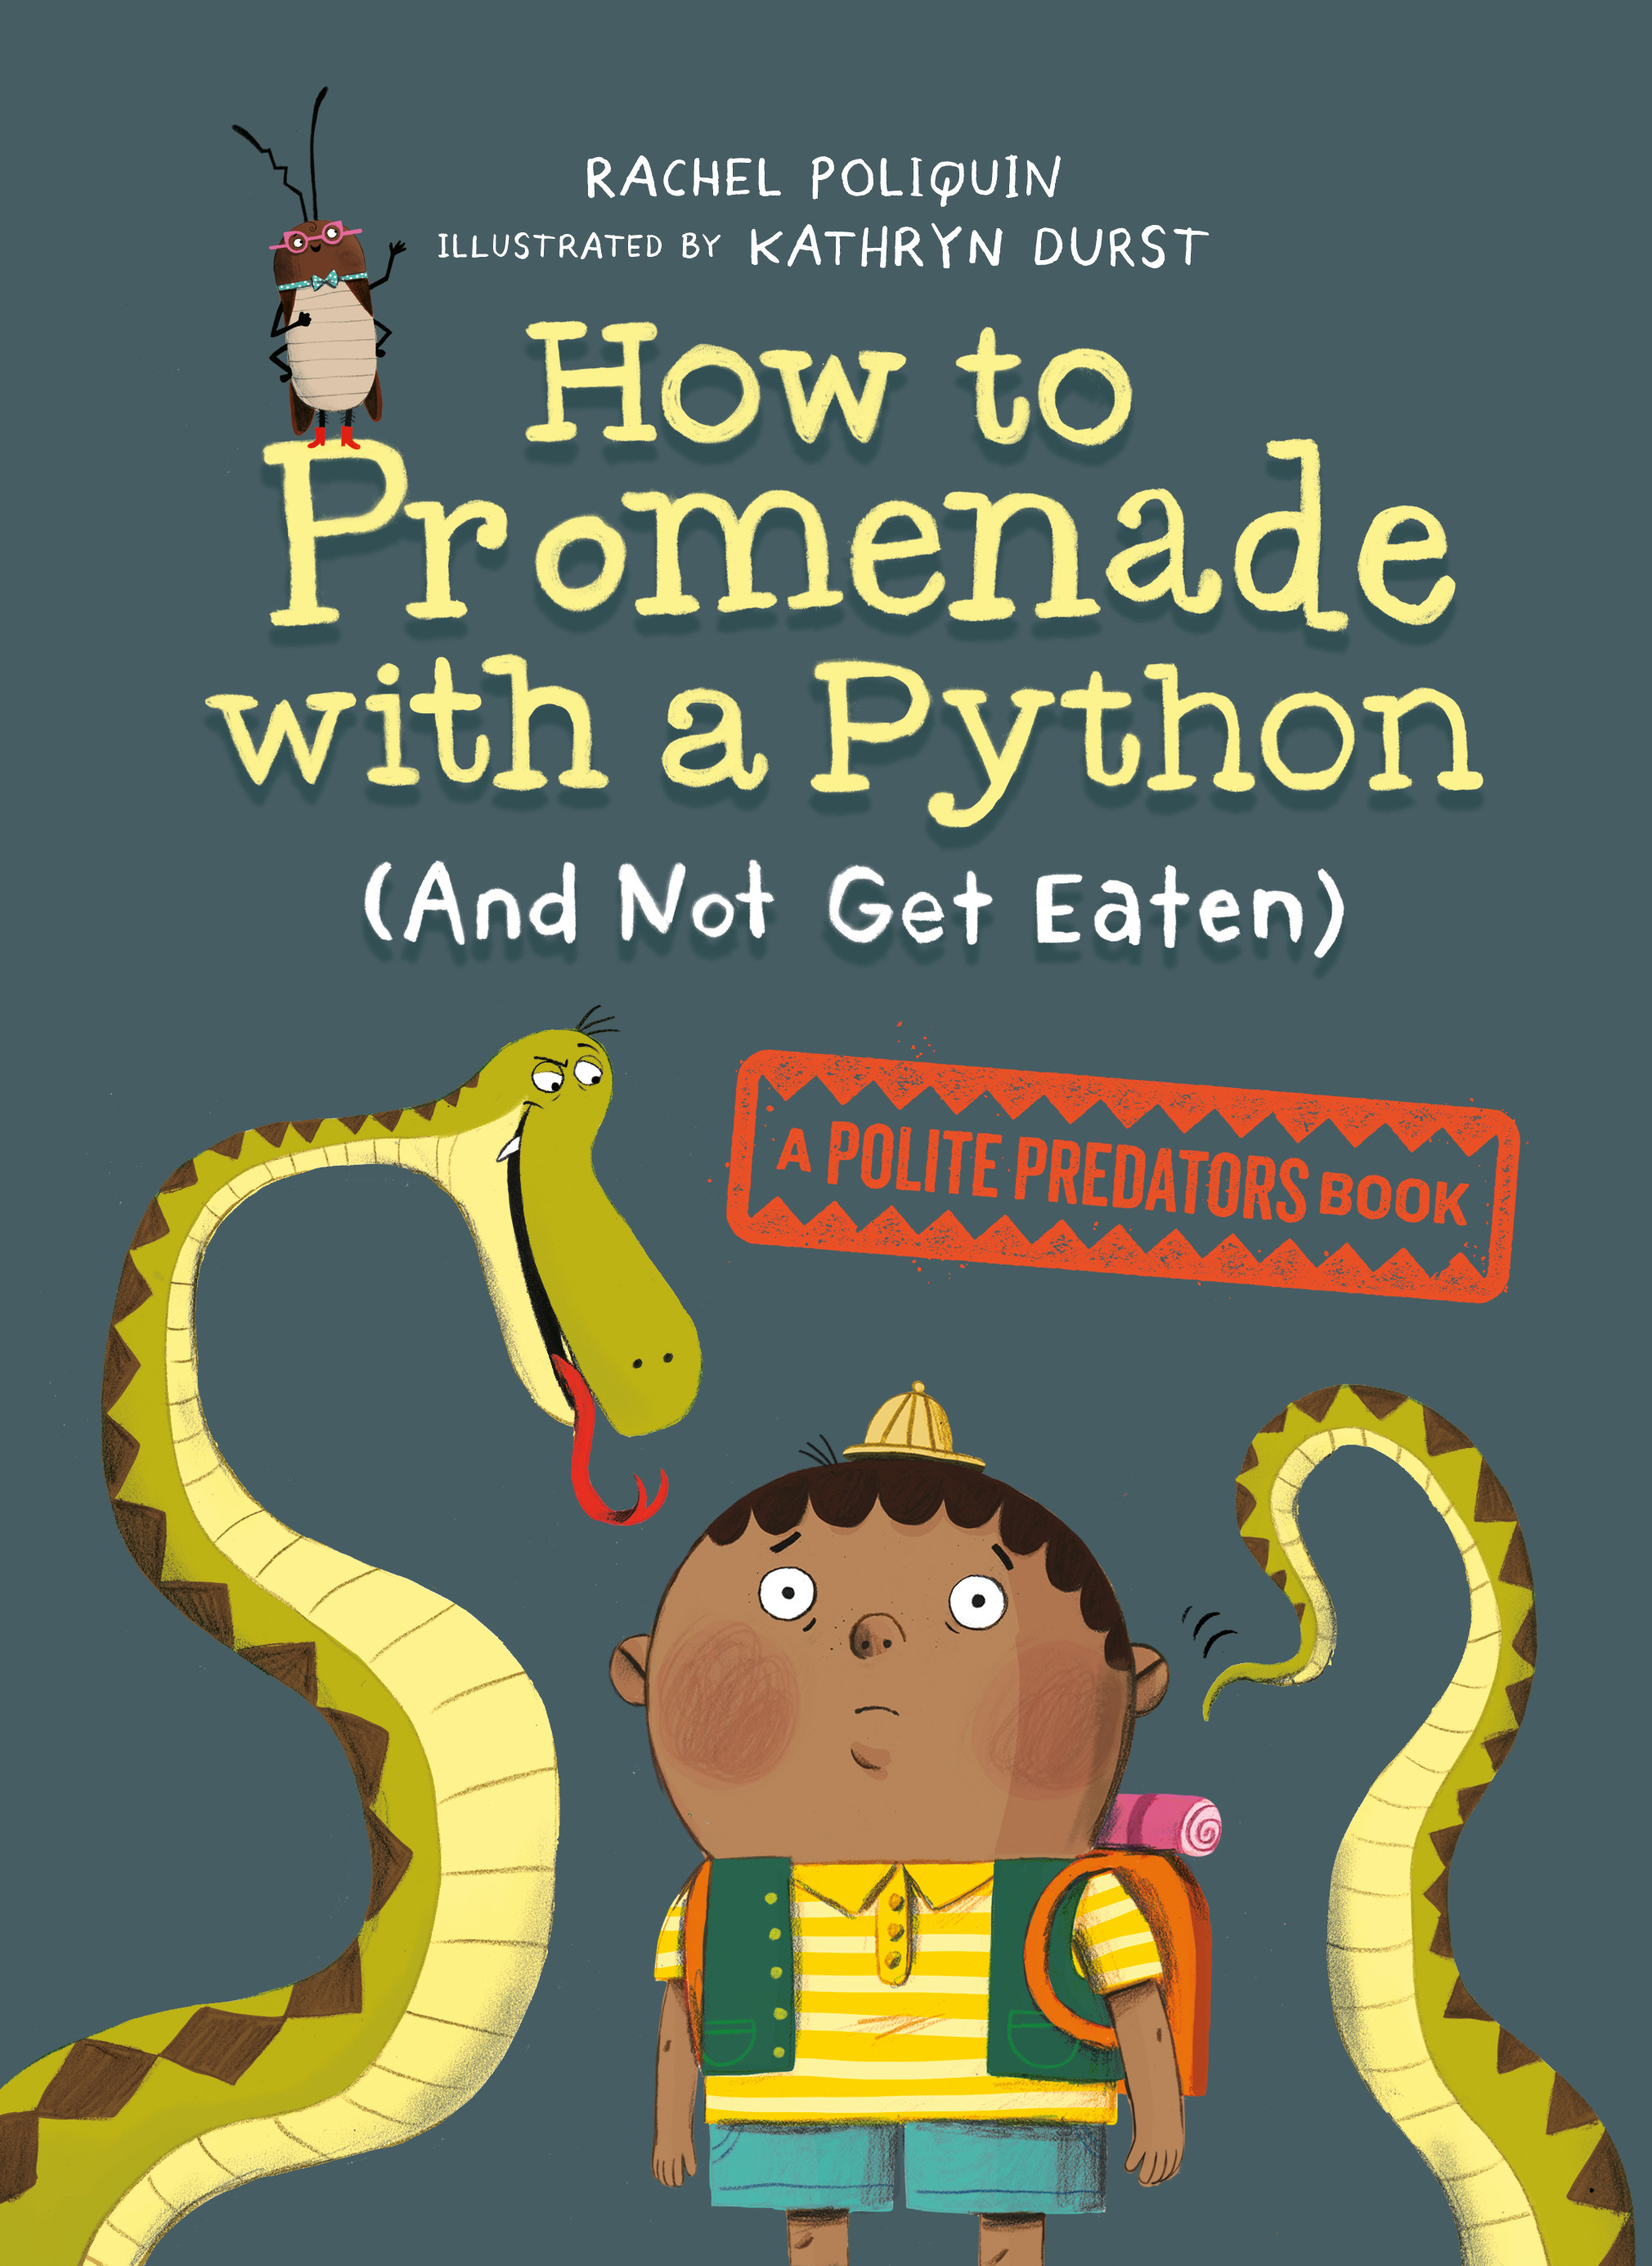 How to Promenade with a Python (and Not Get Eaten) : A Polite Predators Book | Poliquin, Rachel